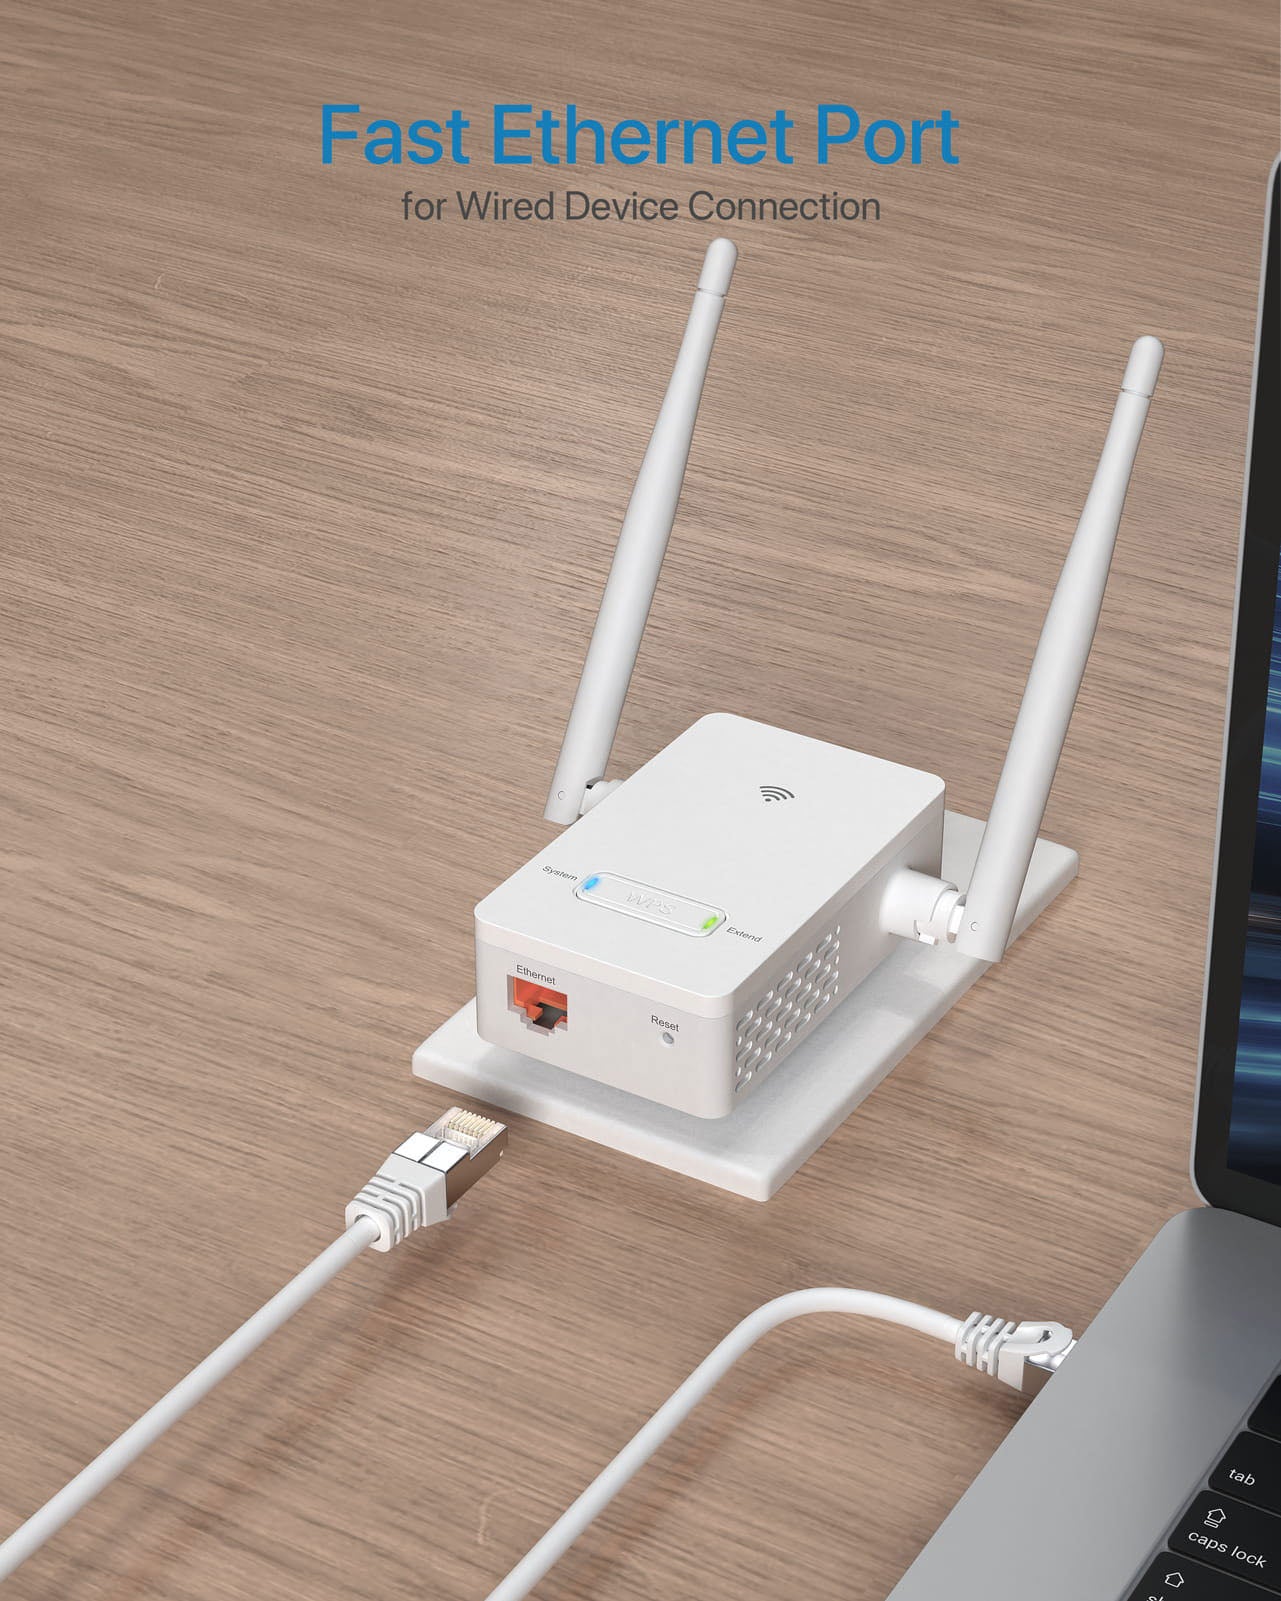 300Mbps WiFi to Ethernet Adapter Wireless Bridge with 100Mbps Fast Ethernet Port for Any Wired Devices